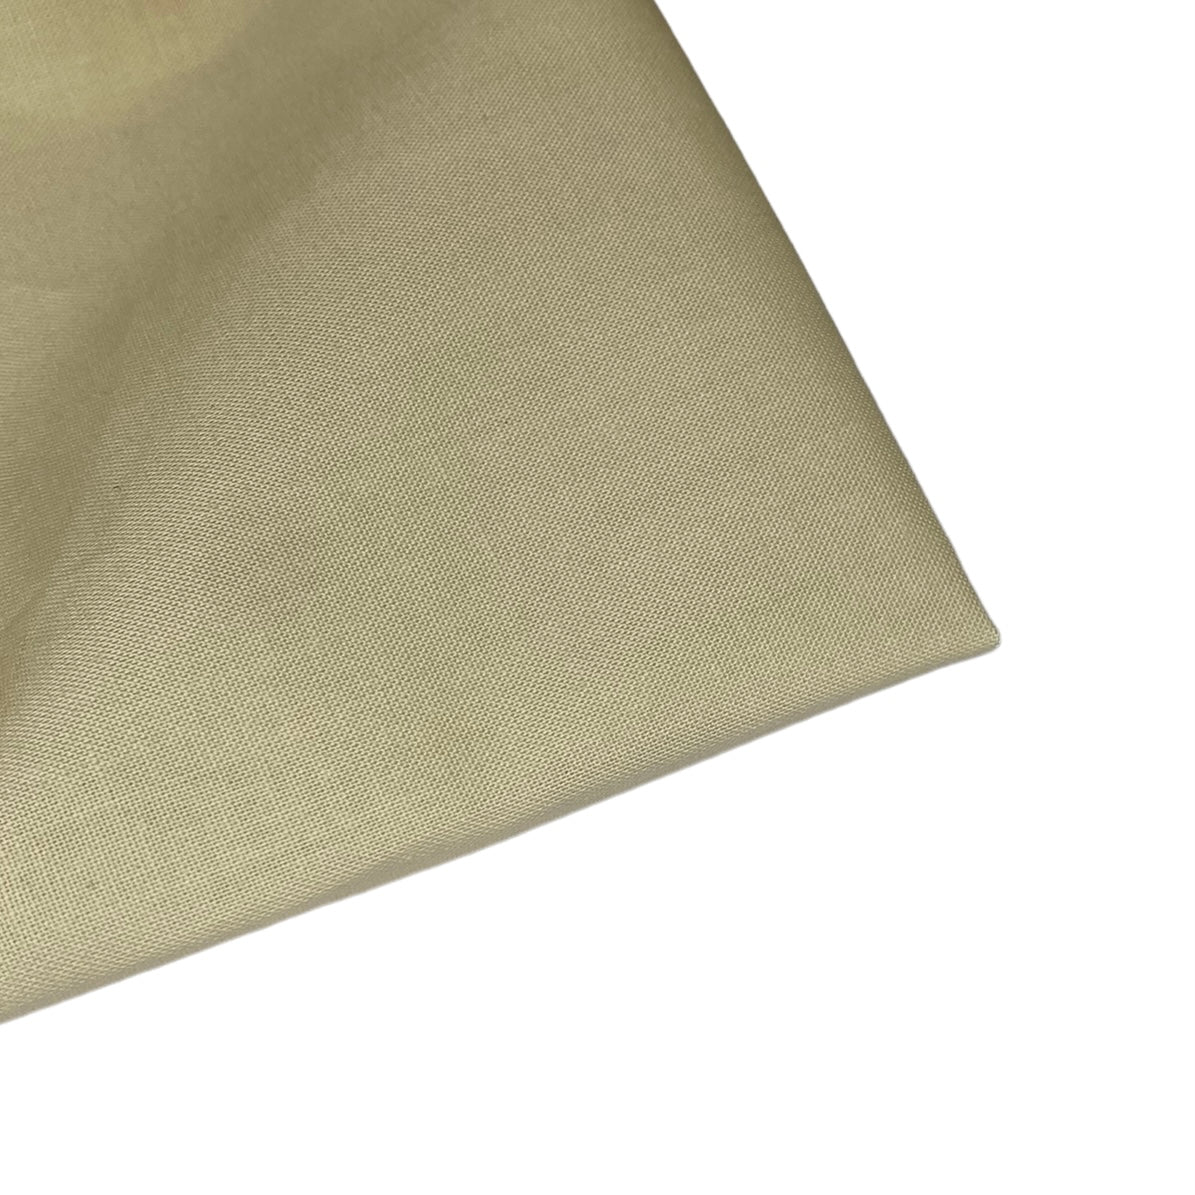 Cotton Broadcloth - Brown